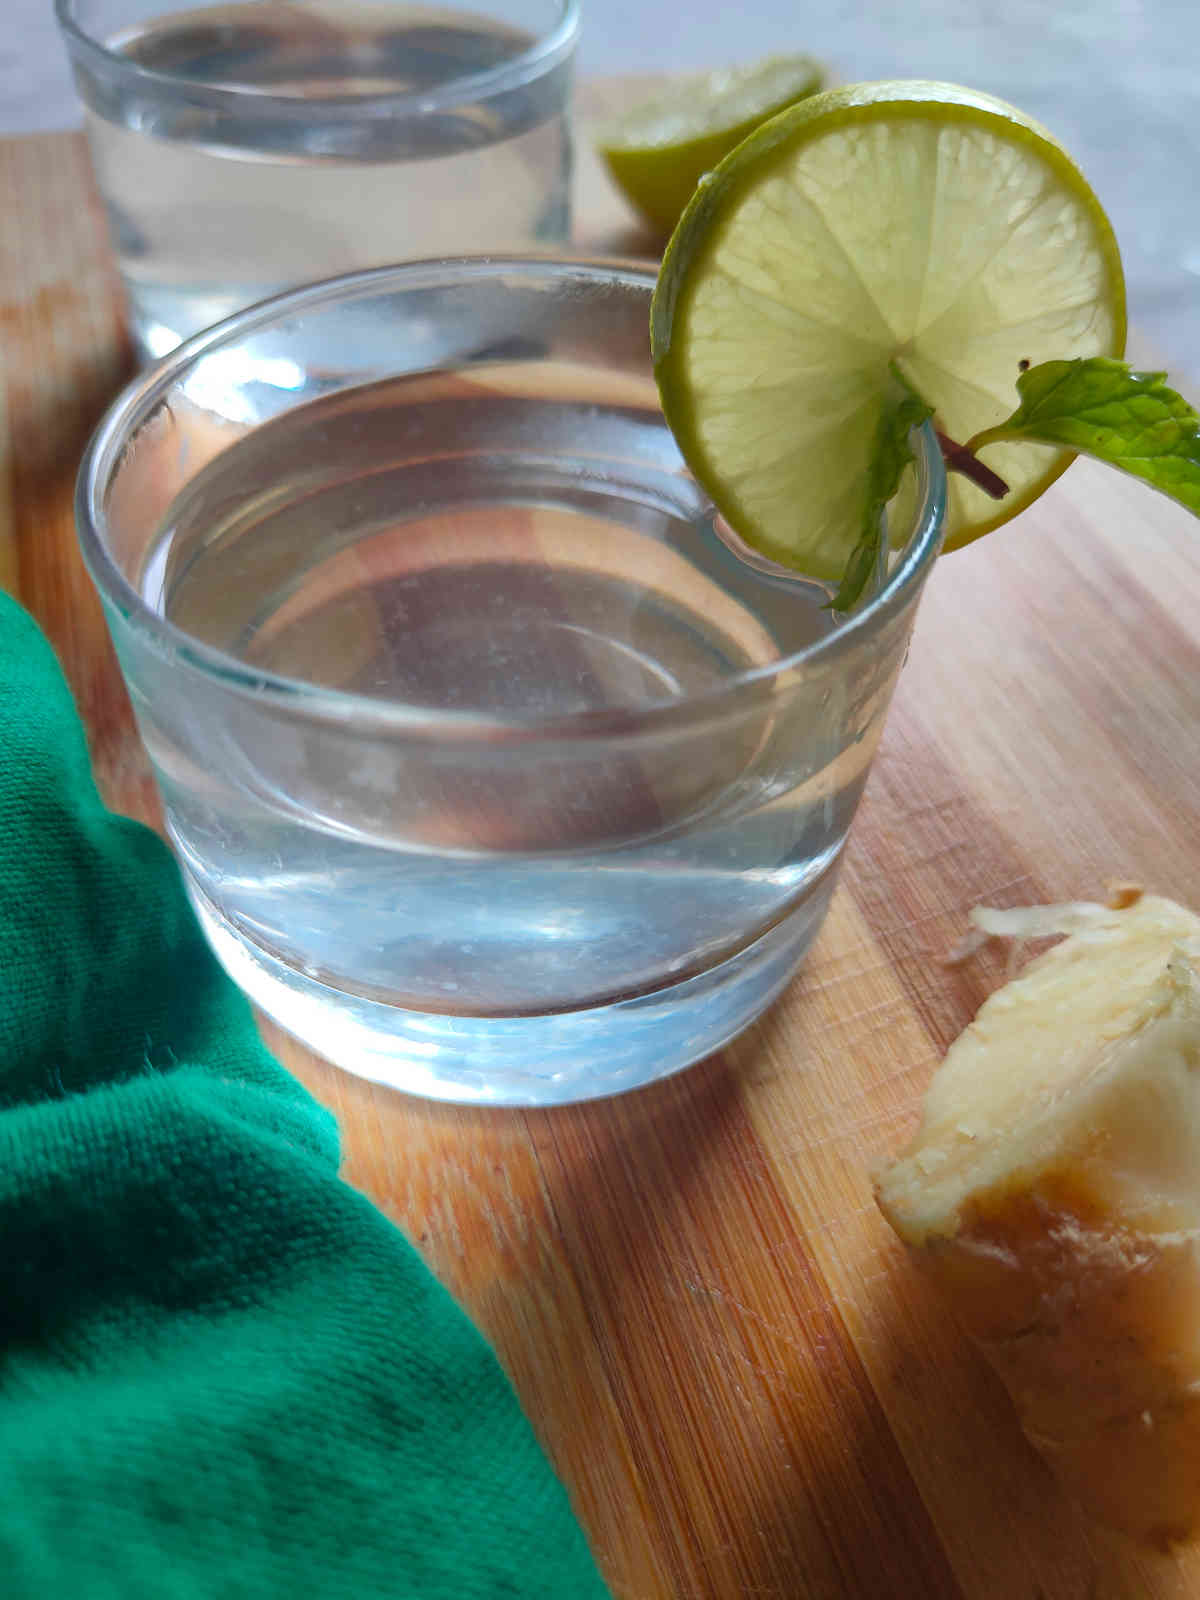 ginger tea for relief in acid reflux with lemon